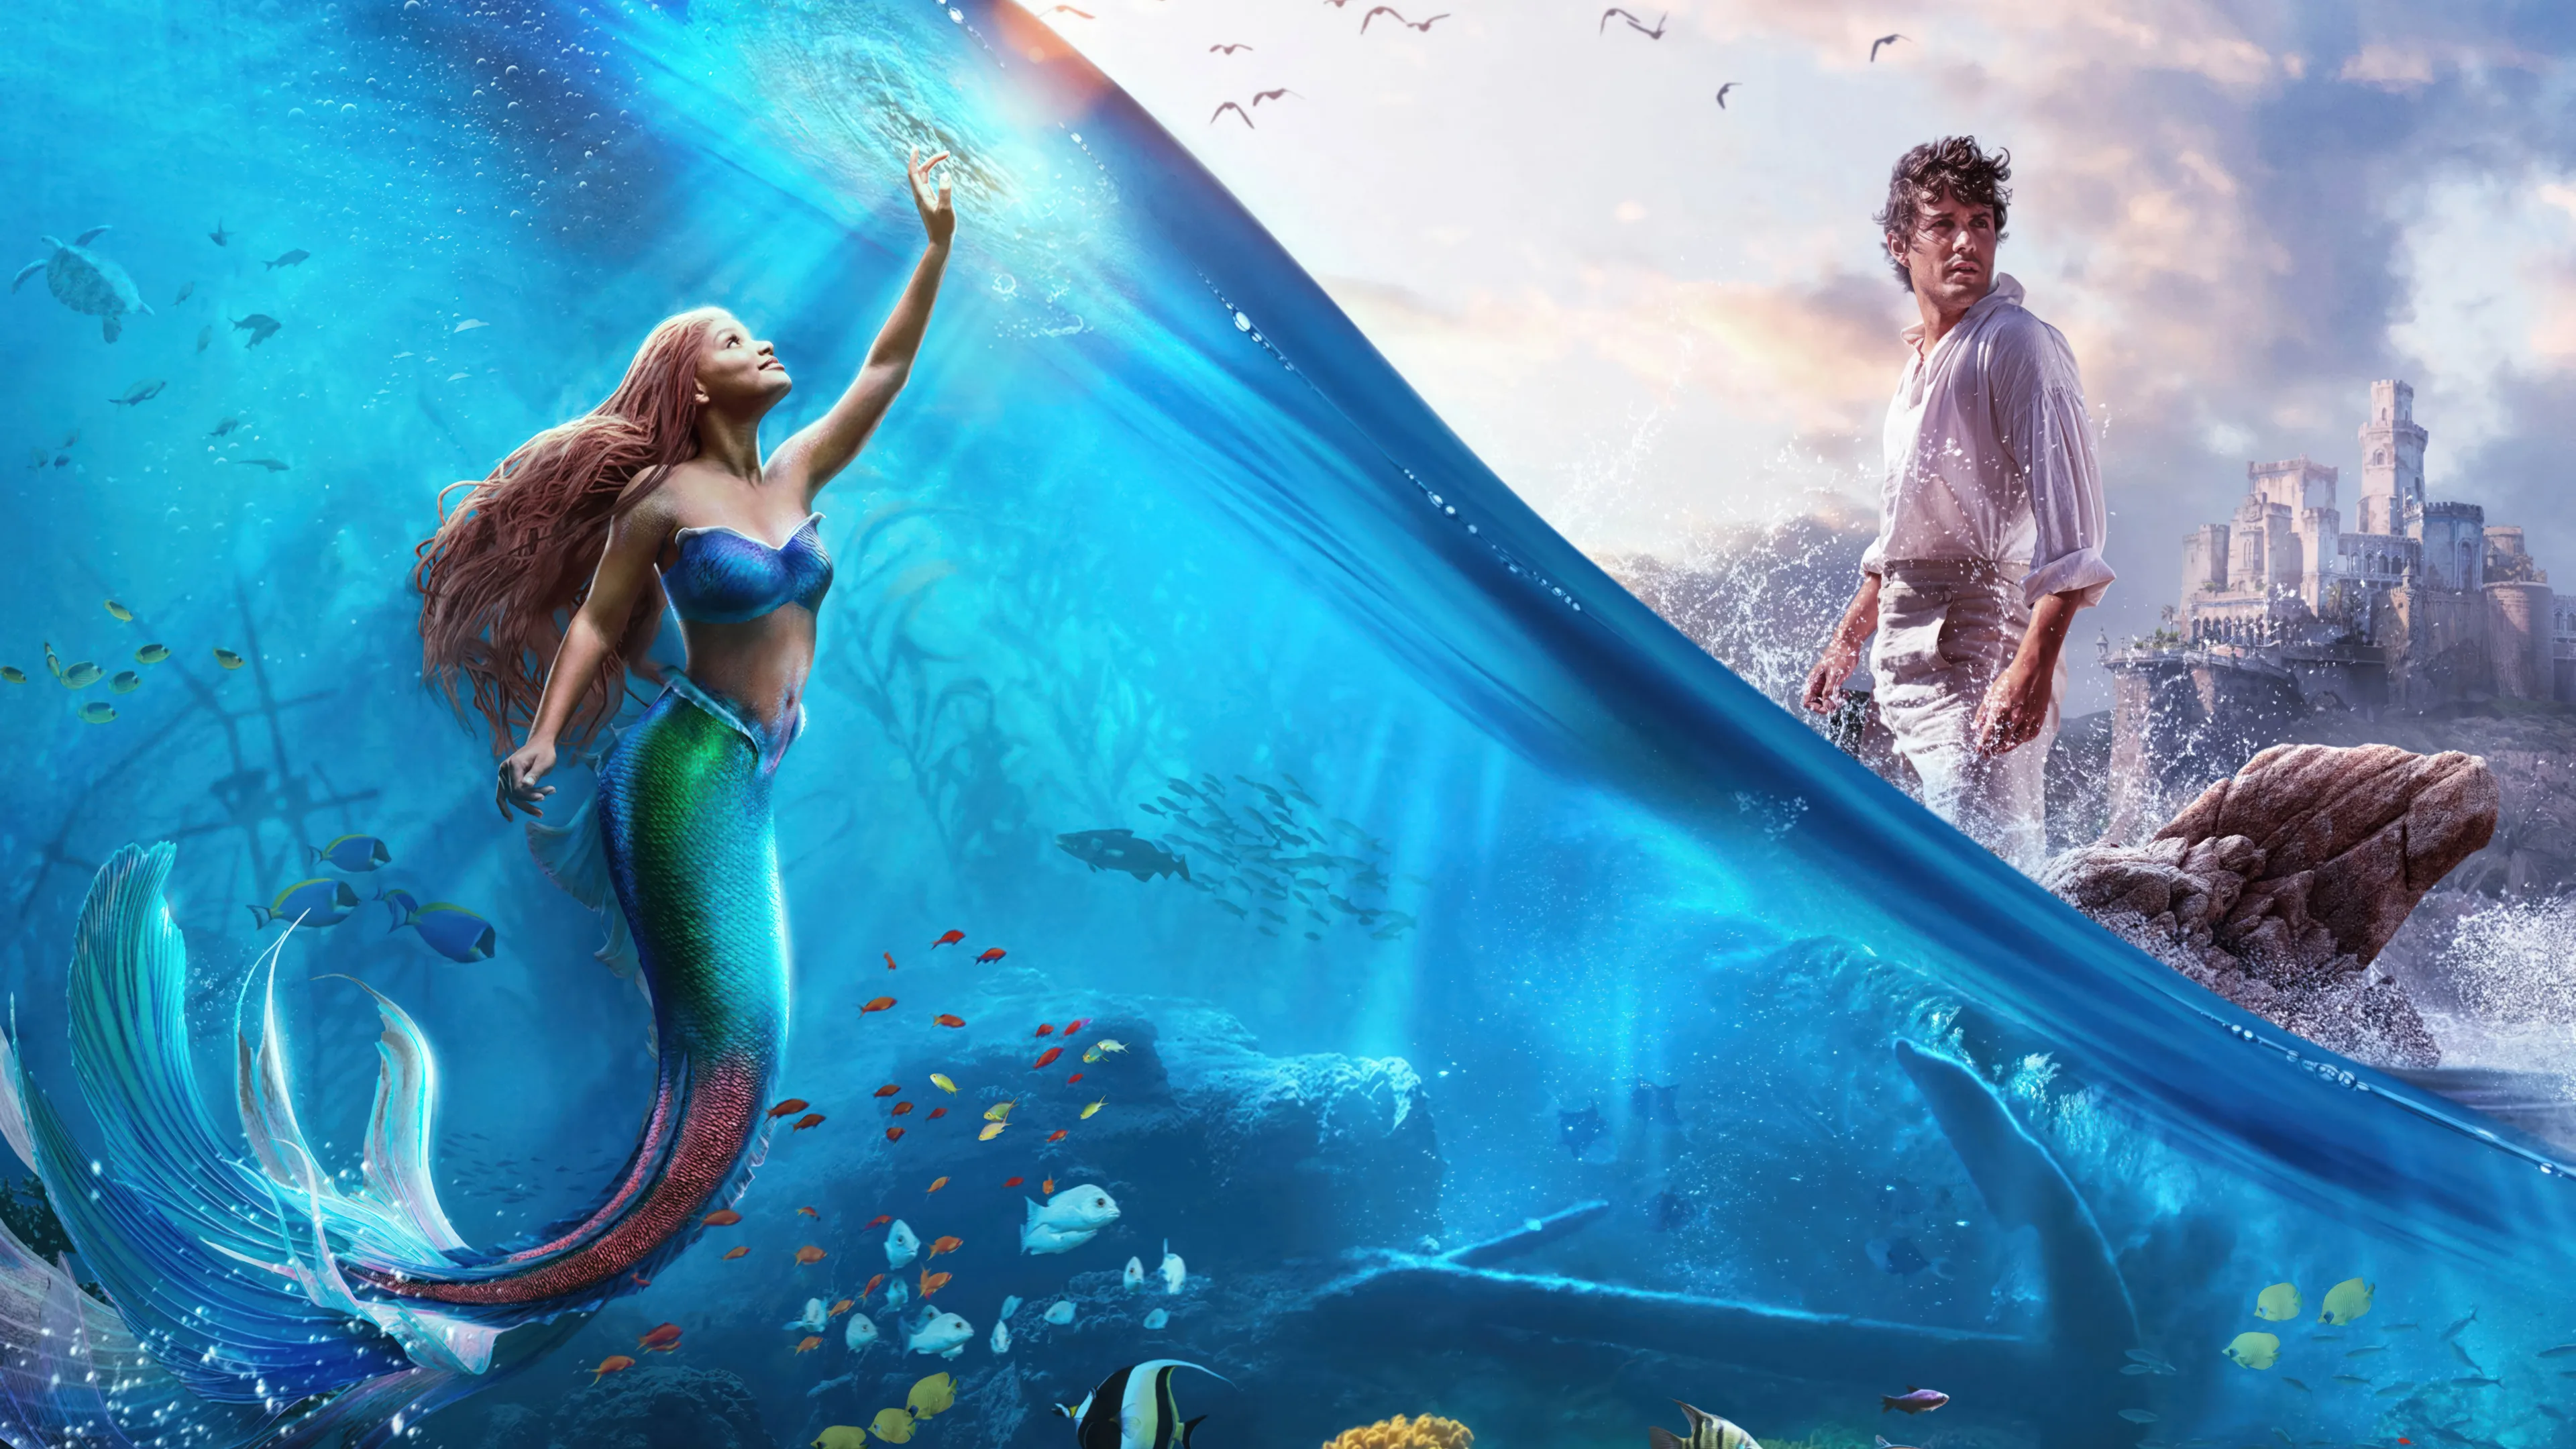 70 The Little Mermaid 1989 HD Wallpapers and Backgrounds